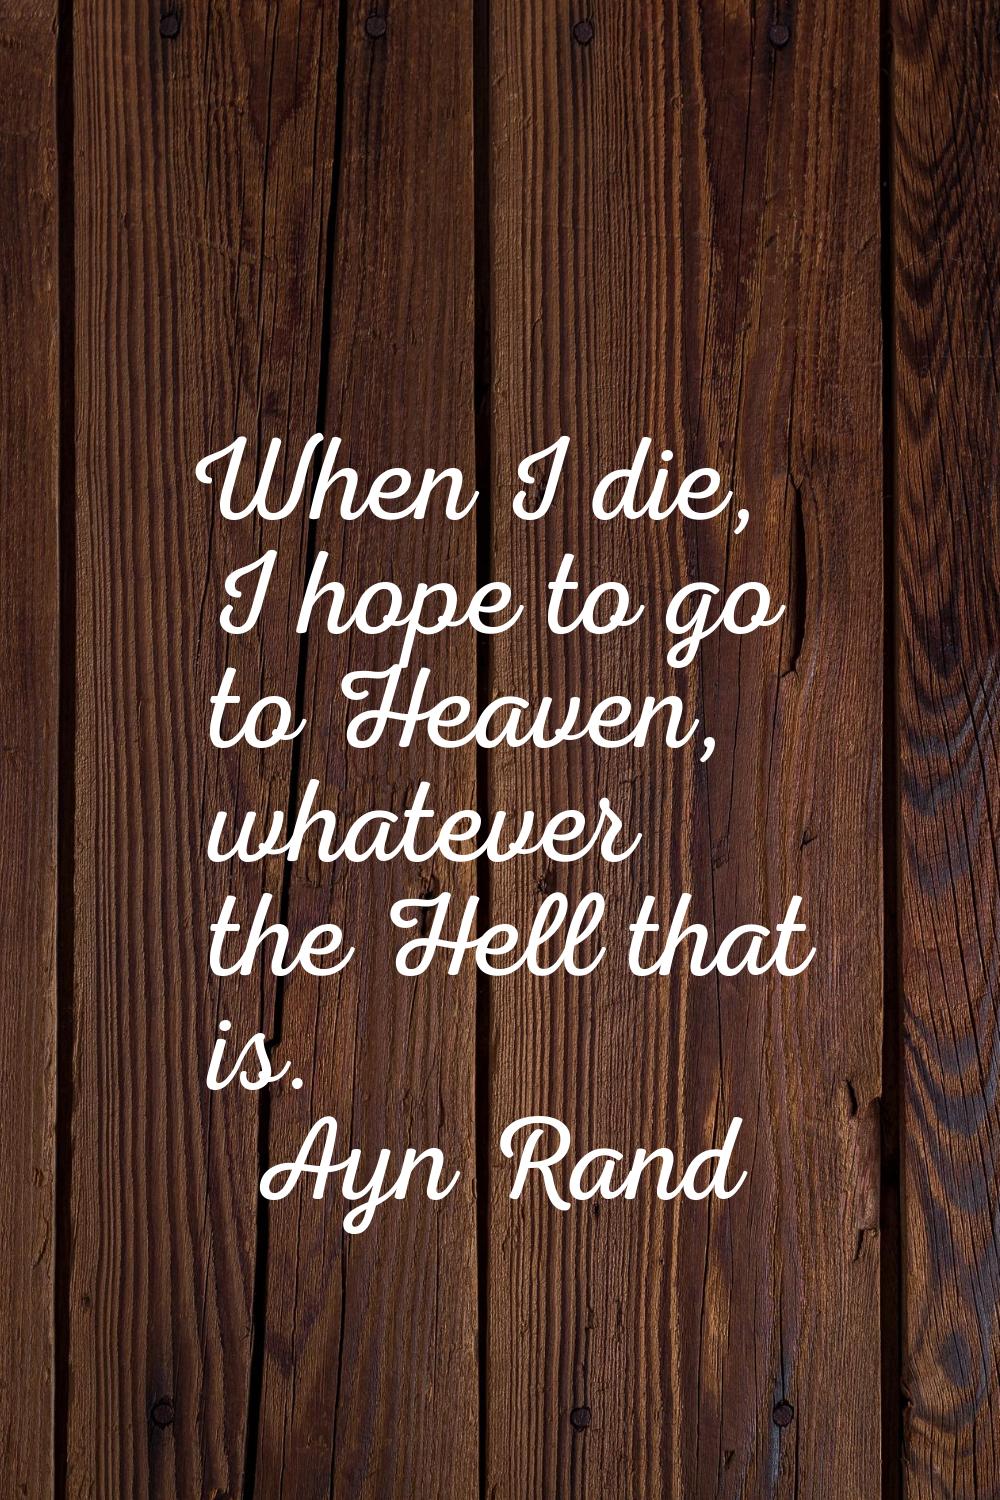 When I die, I hope to go to Heaven, whatever the Hell that is.